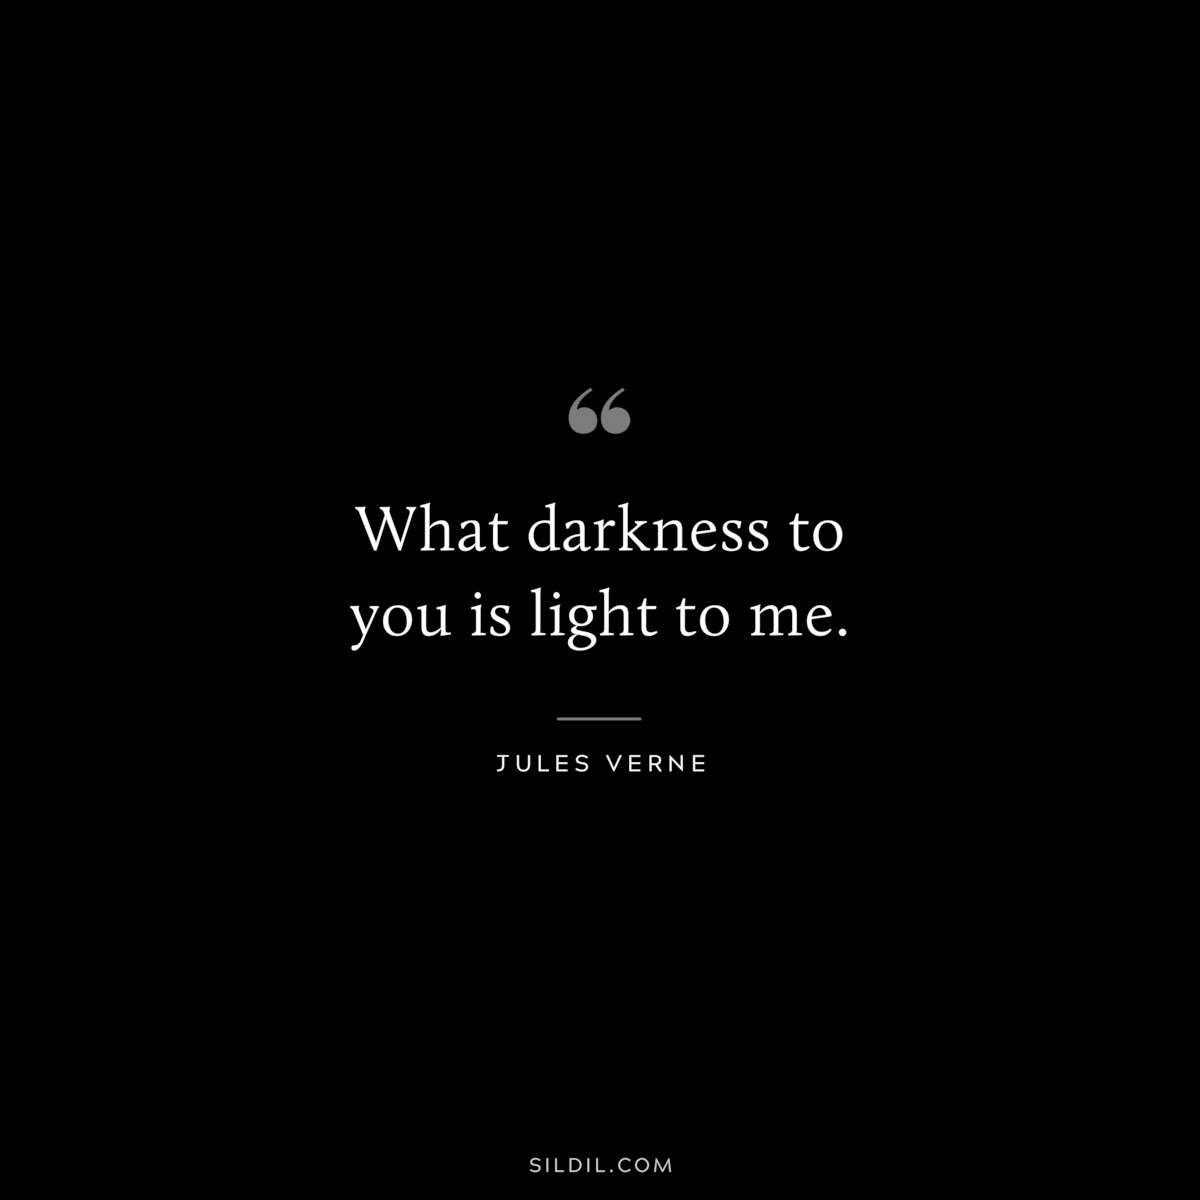 What darkness to you is light to me.